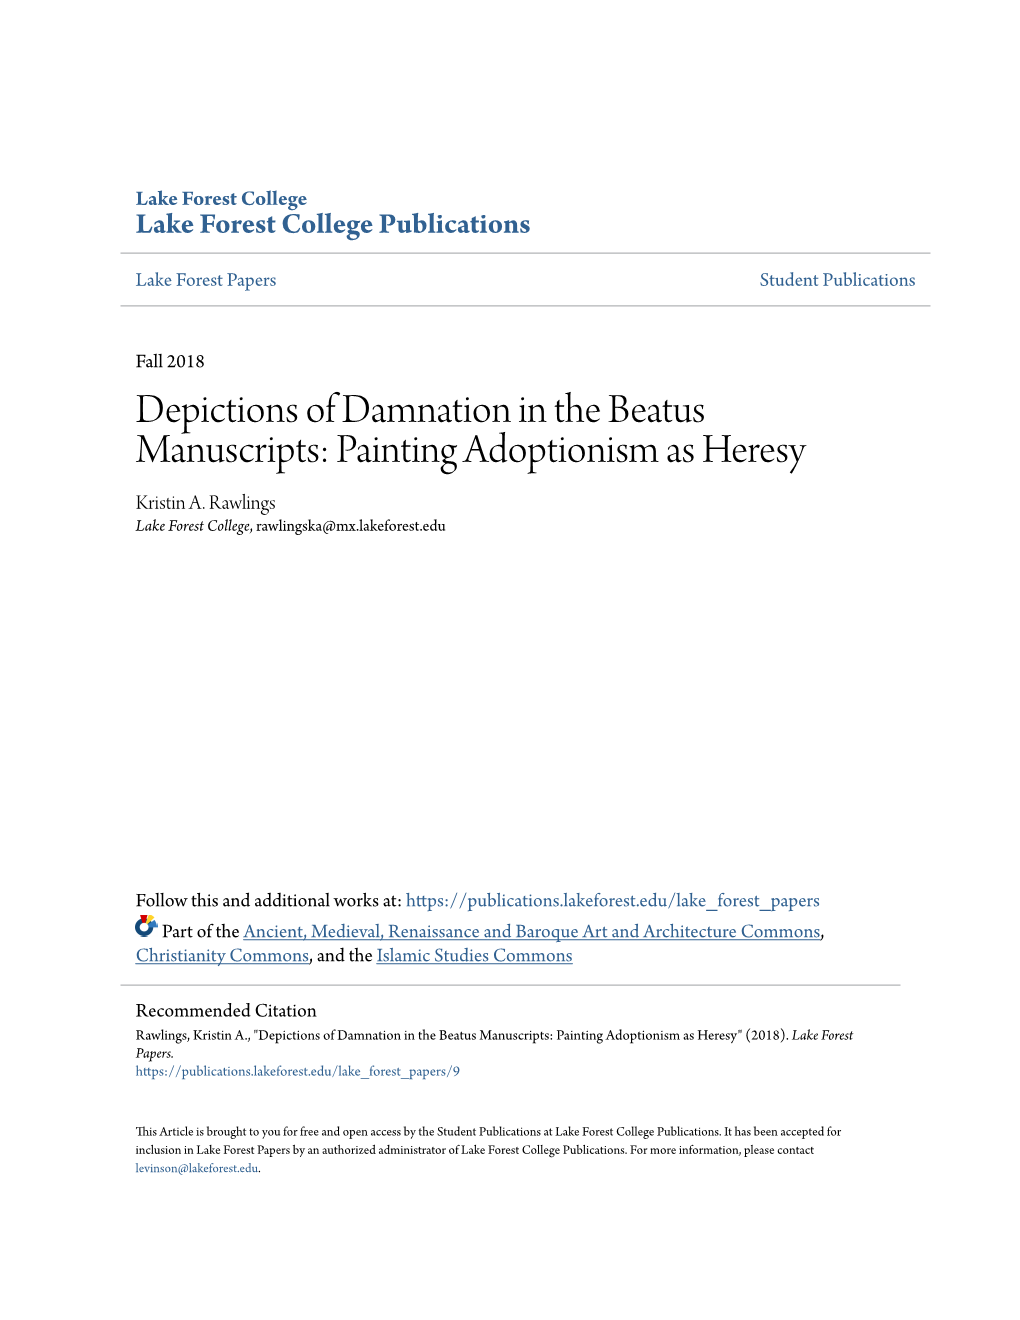 Depictions of Damnation in the Beatus Manuscripts: Painting Adoptionism As Heresy Kristin A